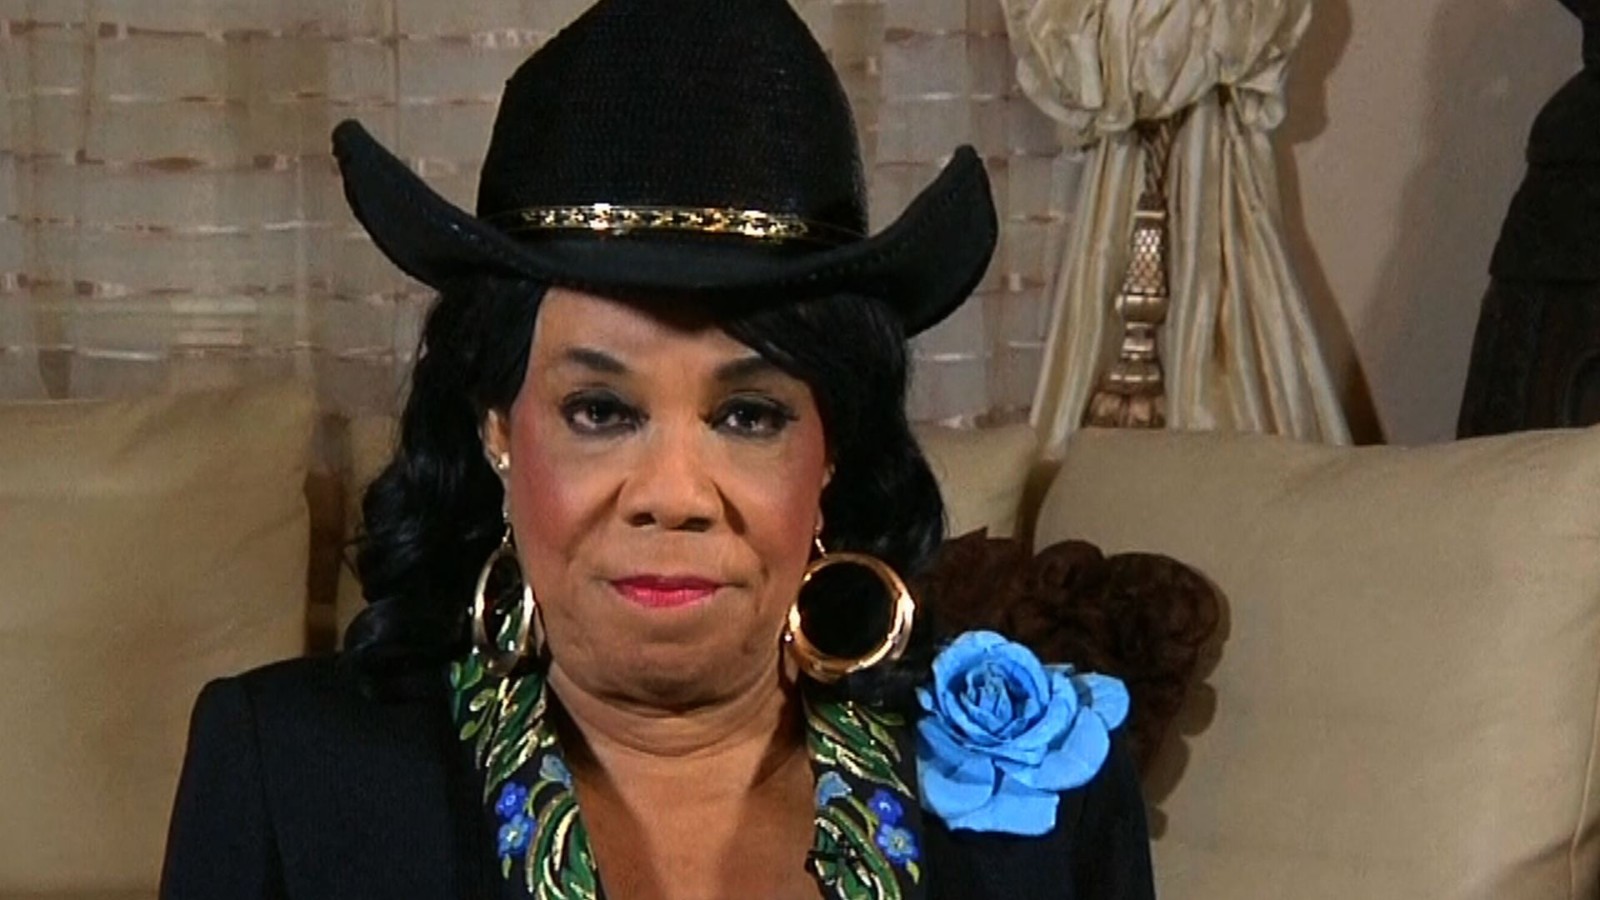 Rep Wilson Trump Told Soldiers Widow He Knew What He Signed Up For 